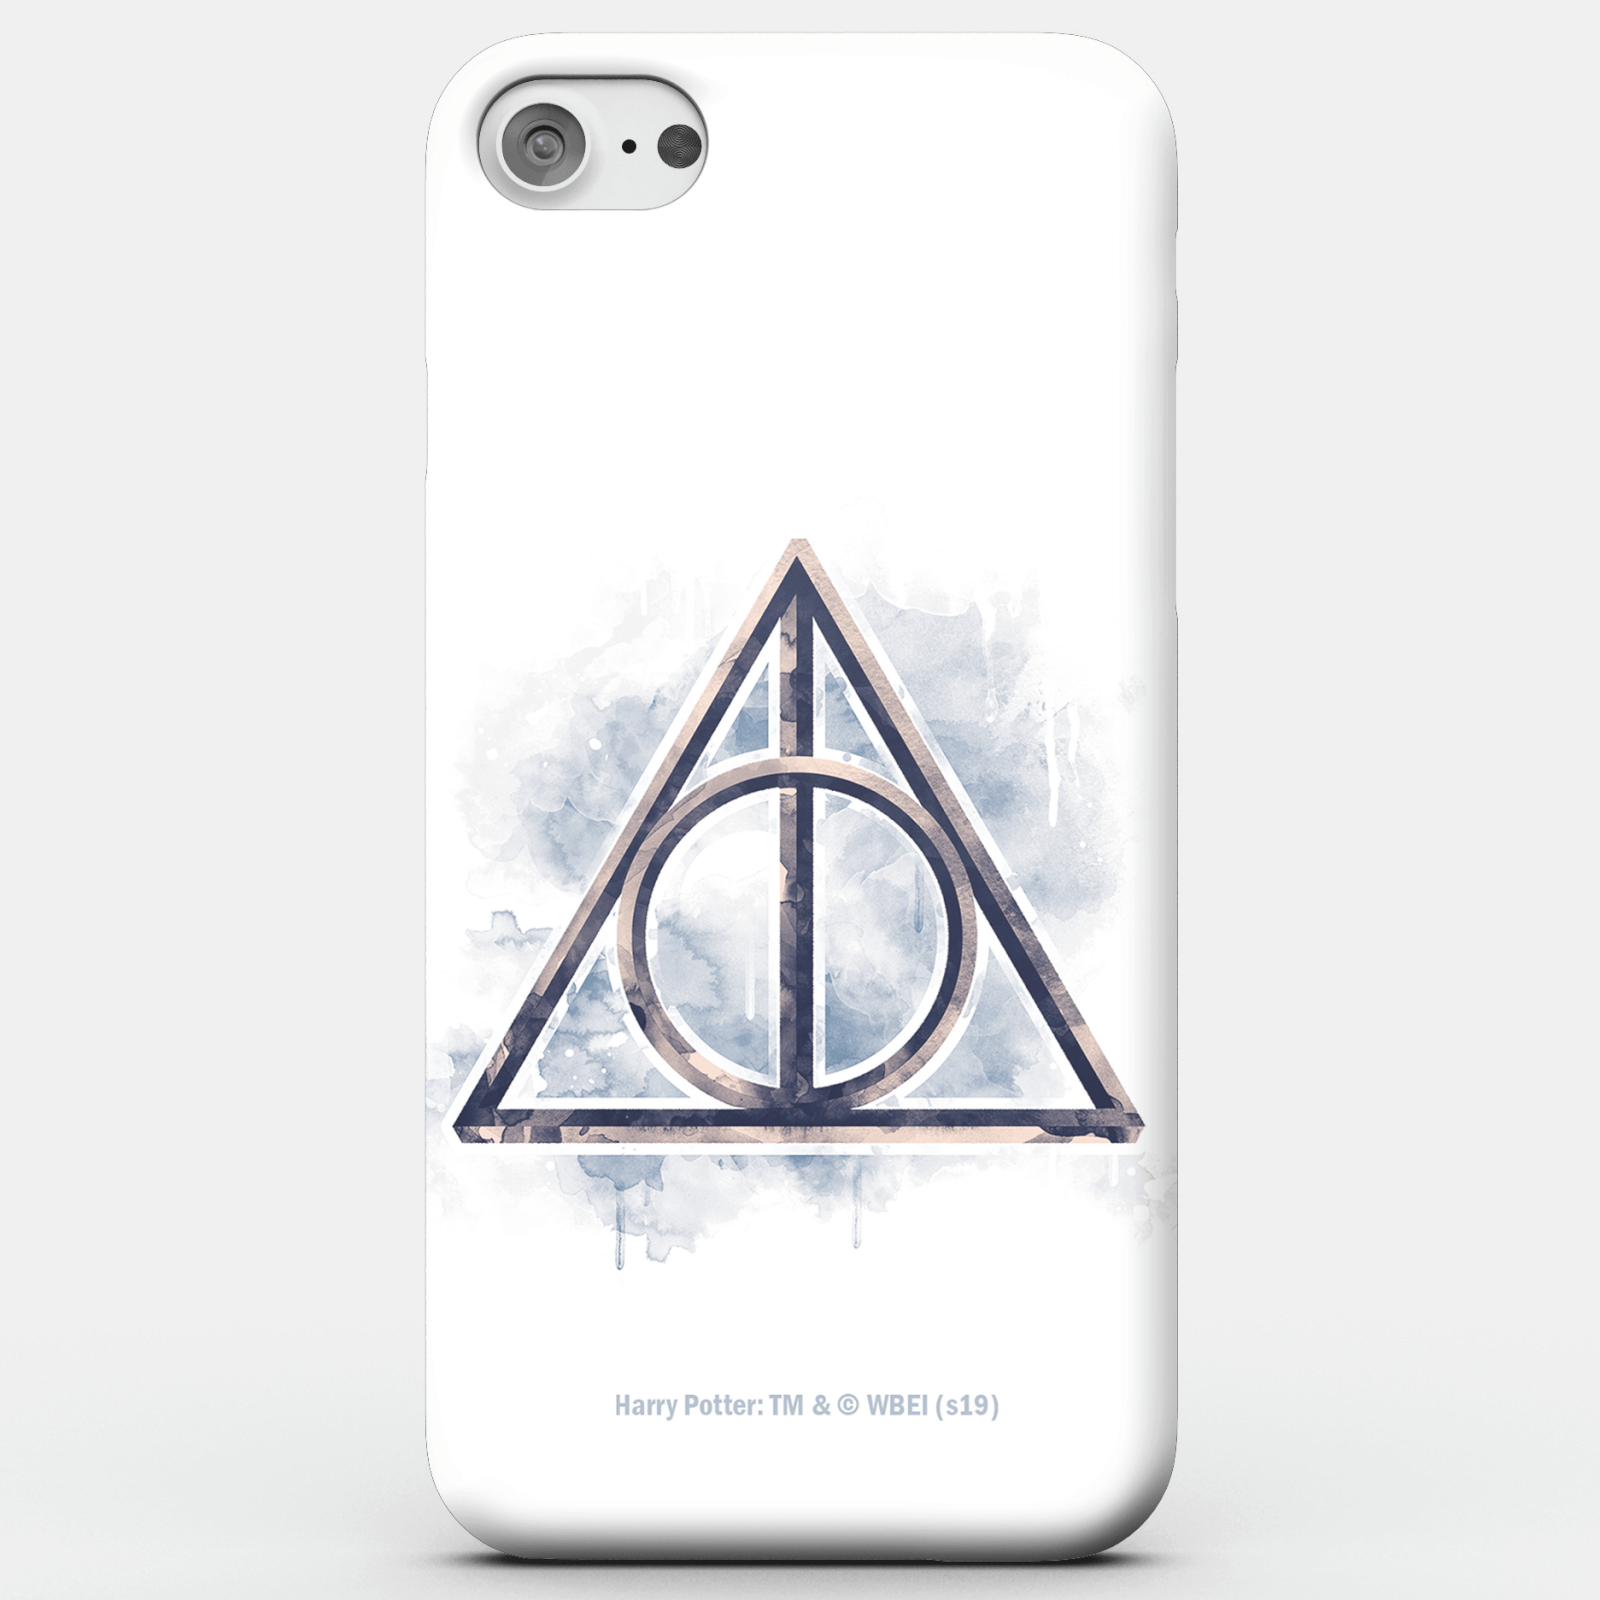 Harry Potter Phonecases Deathy Hallows Phone Case for iPhone and Android - iPhone 5/5s - Snap Case - Matte